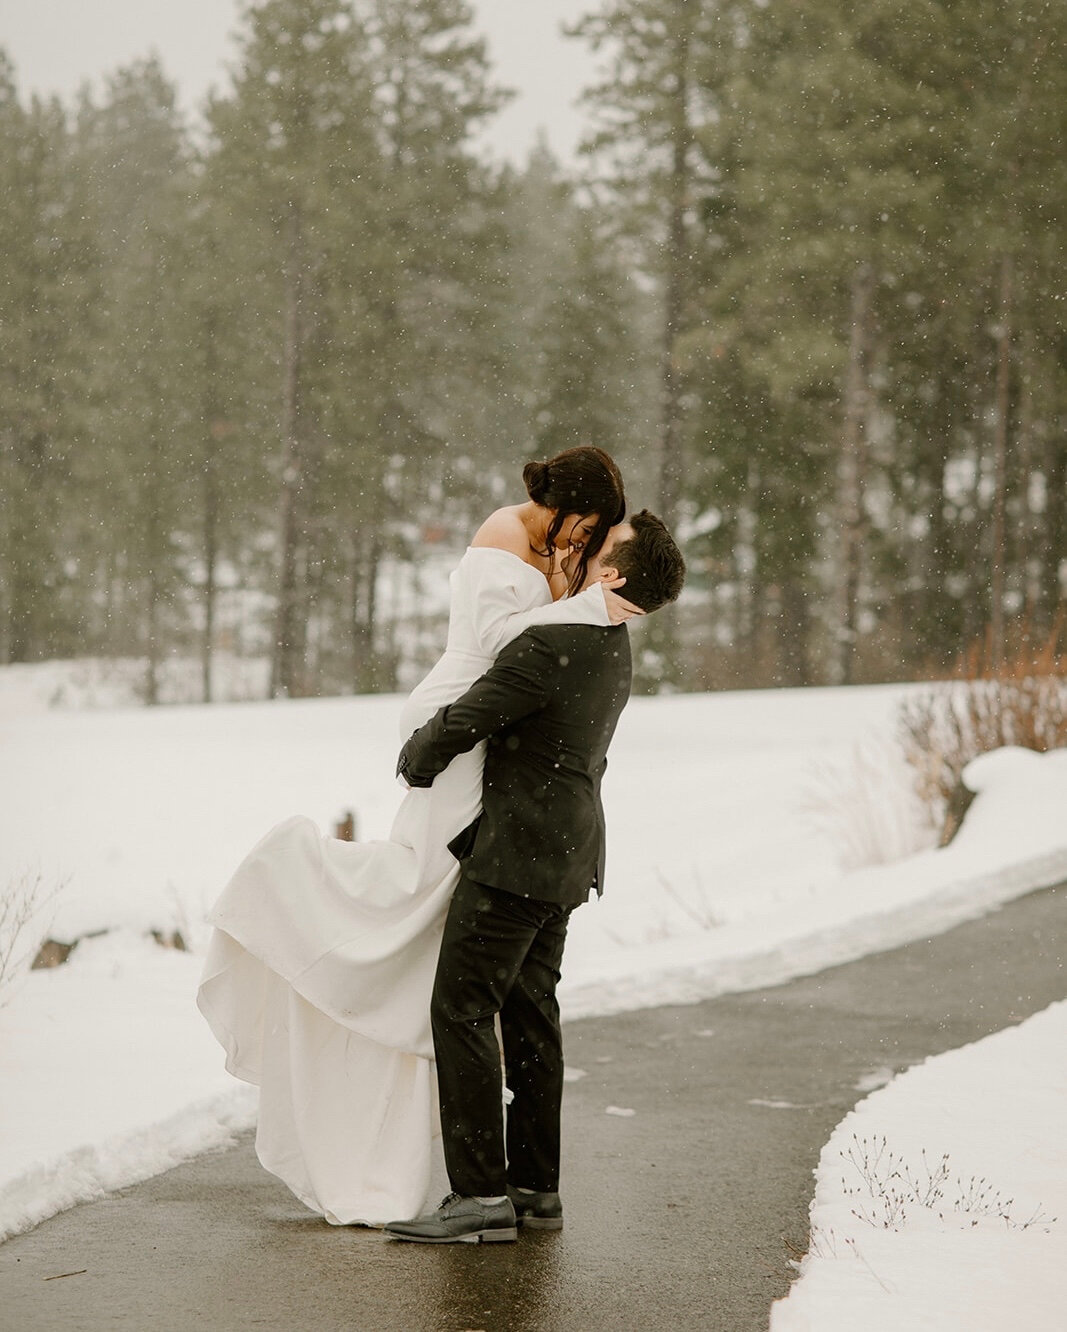 Stay WARM out there! 📷: @gina.Paulson​​​​​​​​
​​​​​​​​
#snowwedding #winterwedding #lrpresets #presets #ginapaulsonpresets #adventurebride #weddinginspo #winterweddinginspo